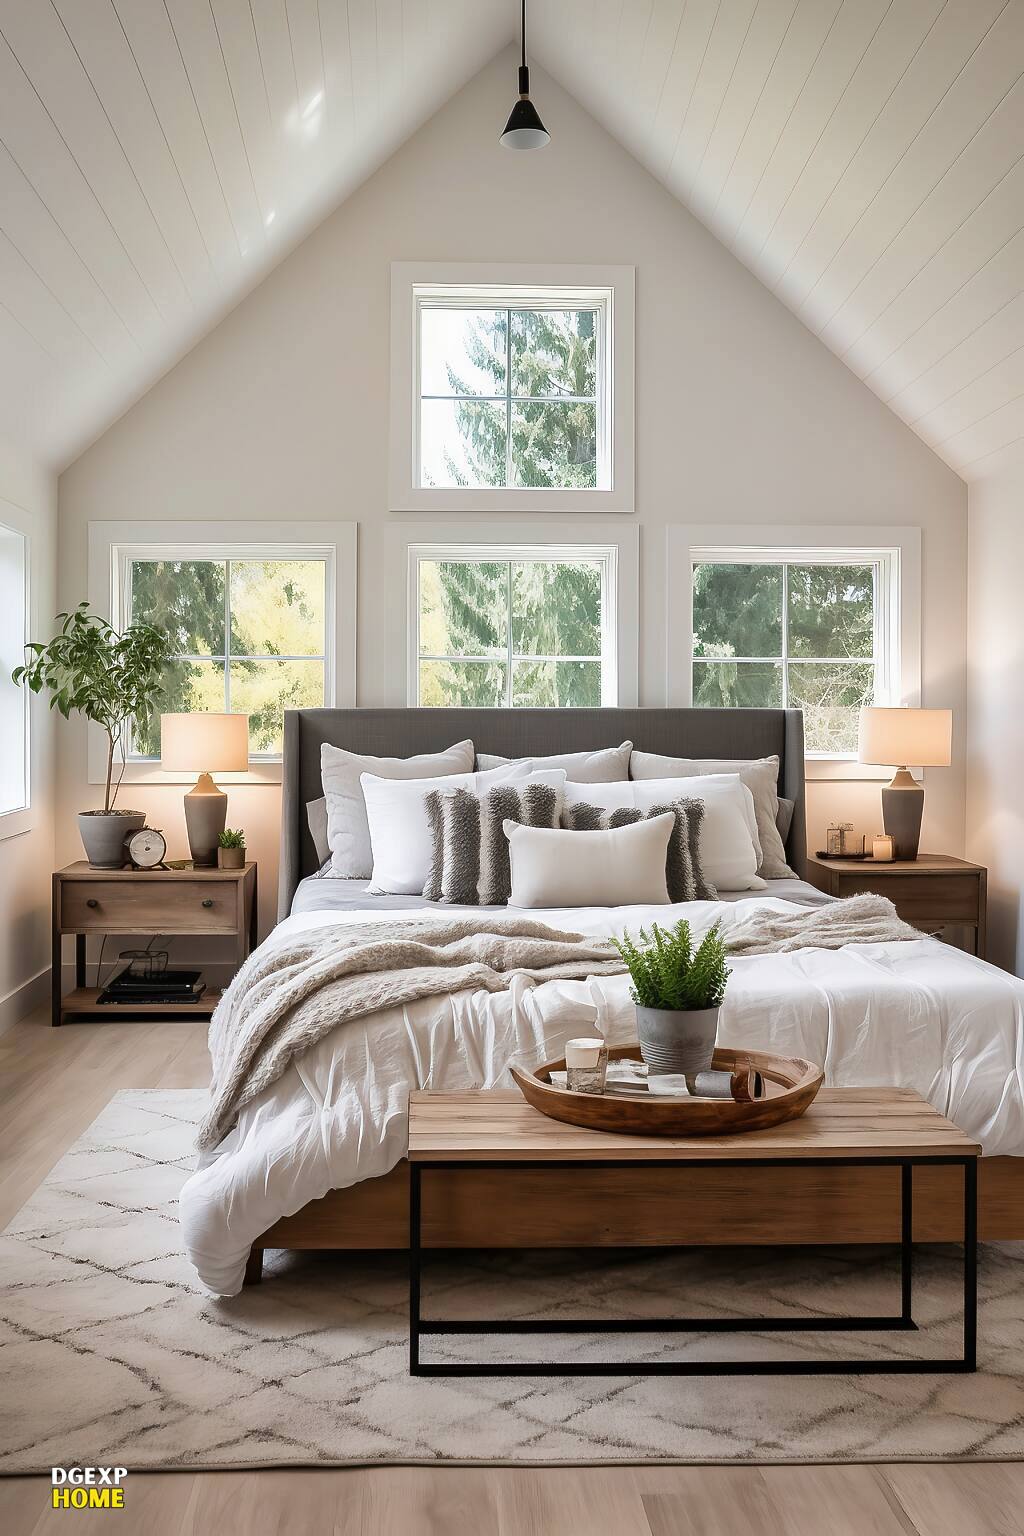 Minimalist Farmhouse Bedroom With A Modern Bed, White Linens, And Natural Wood Accents.